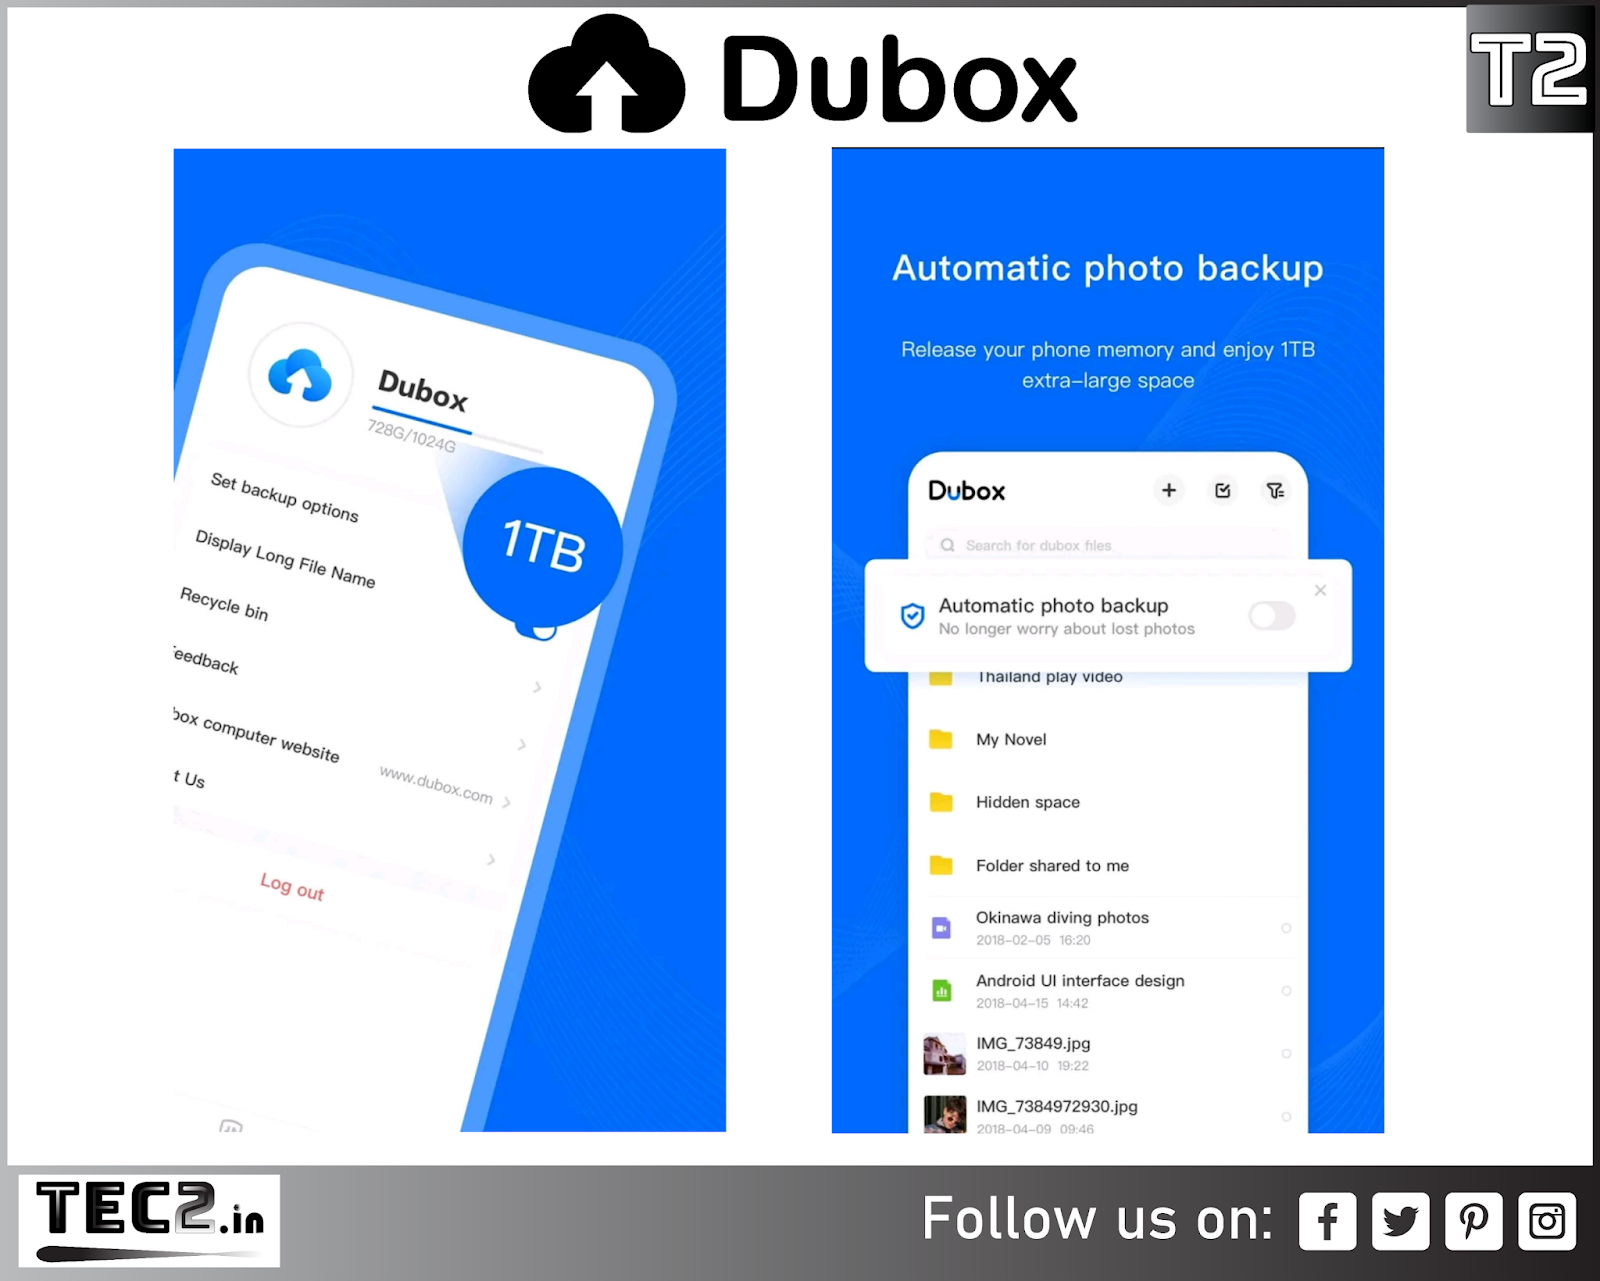 Dubox Features What Makes It Stand Out?